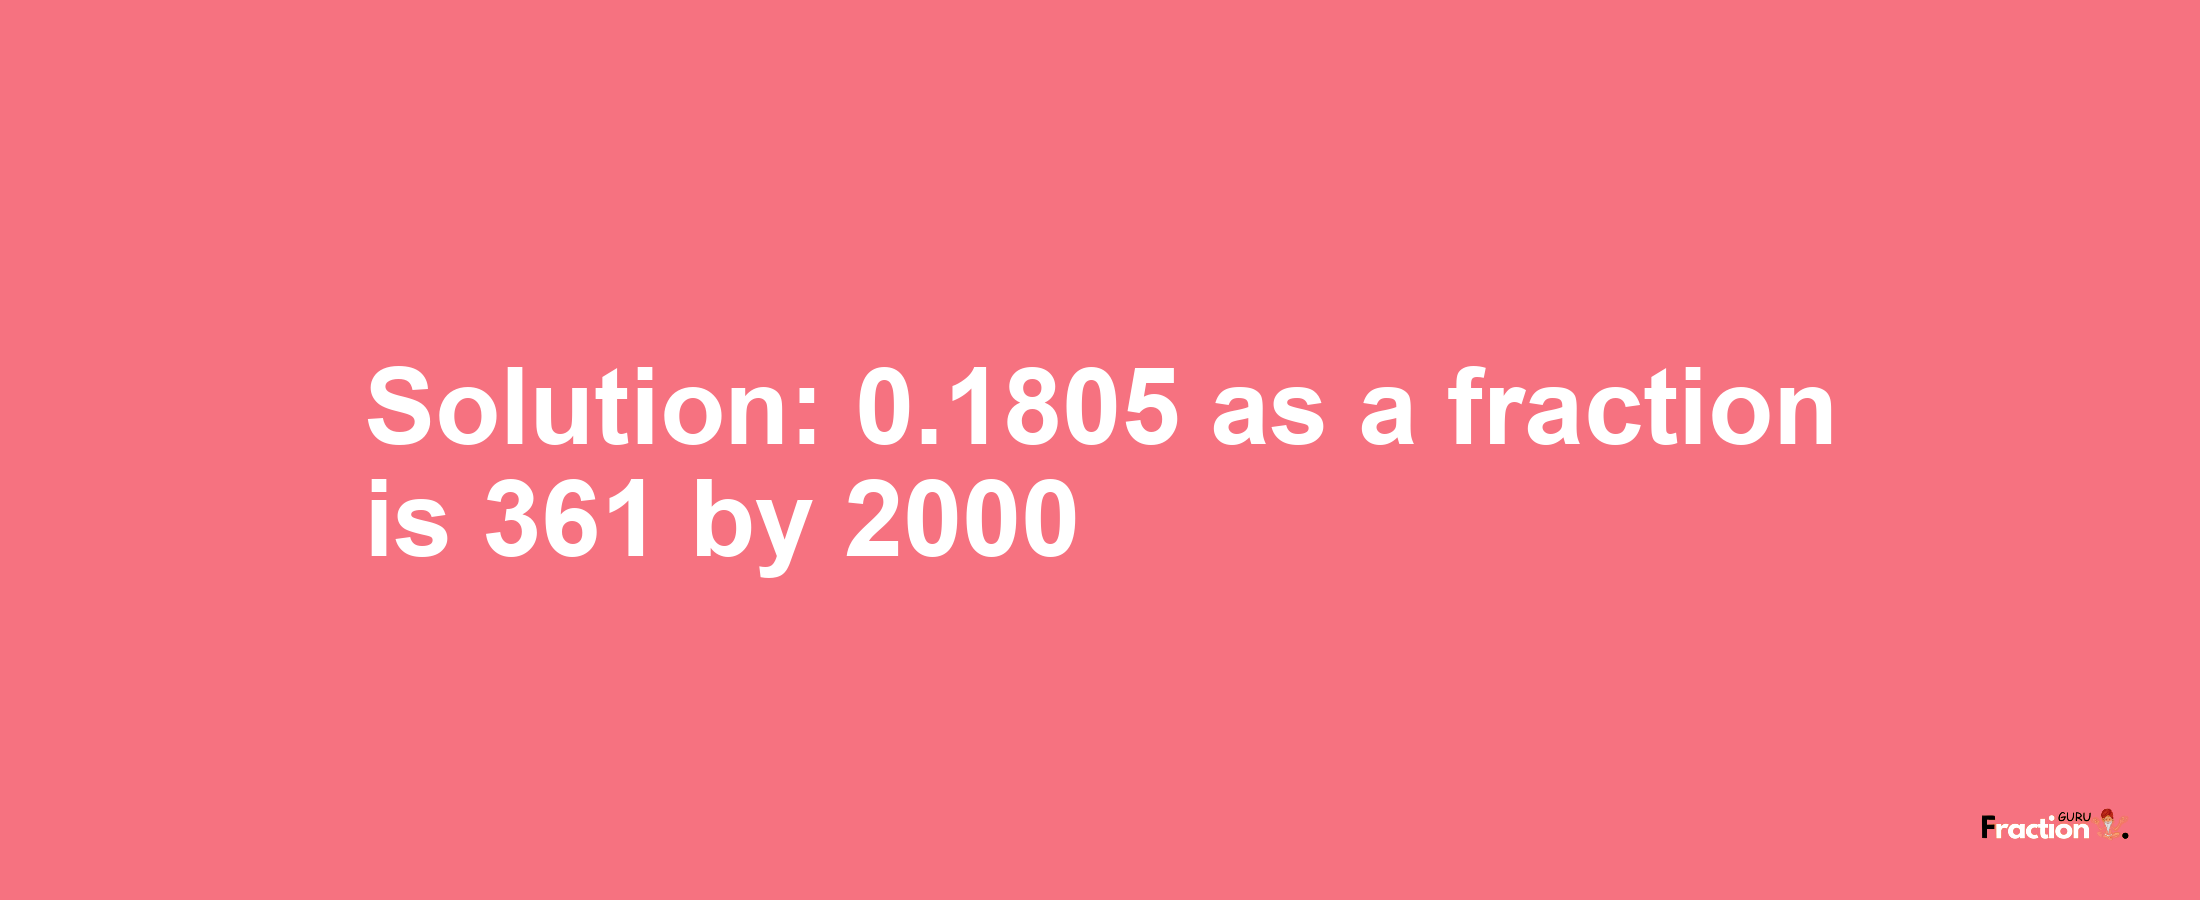 Solution:0.1805 as a fraction is 361/2000